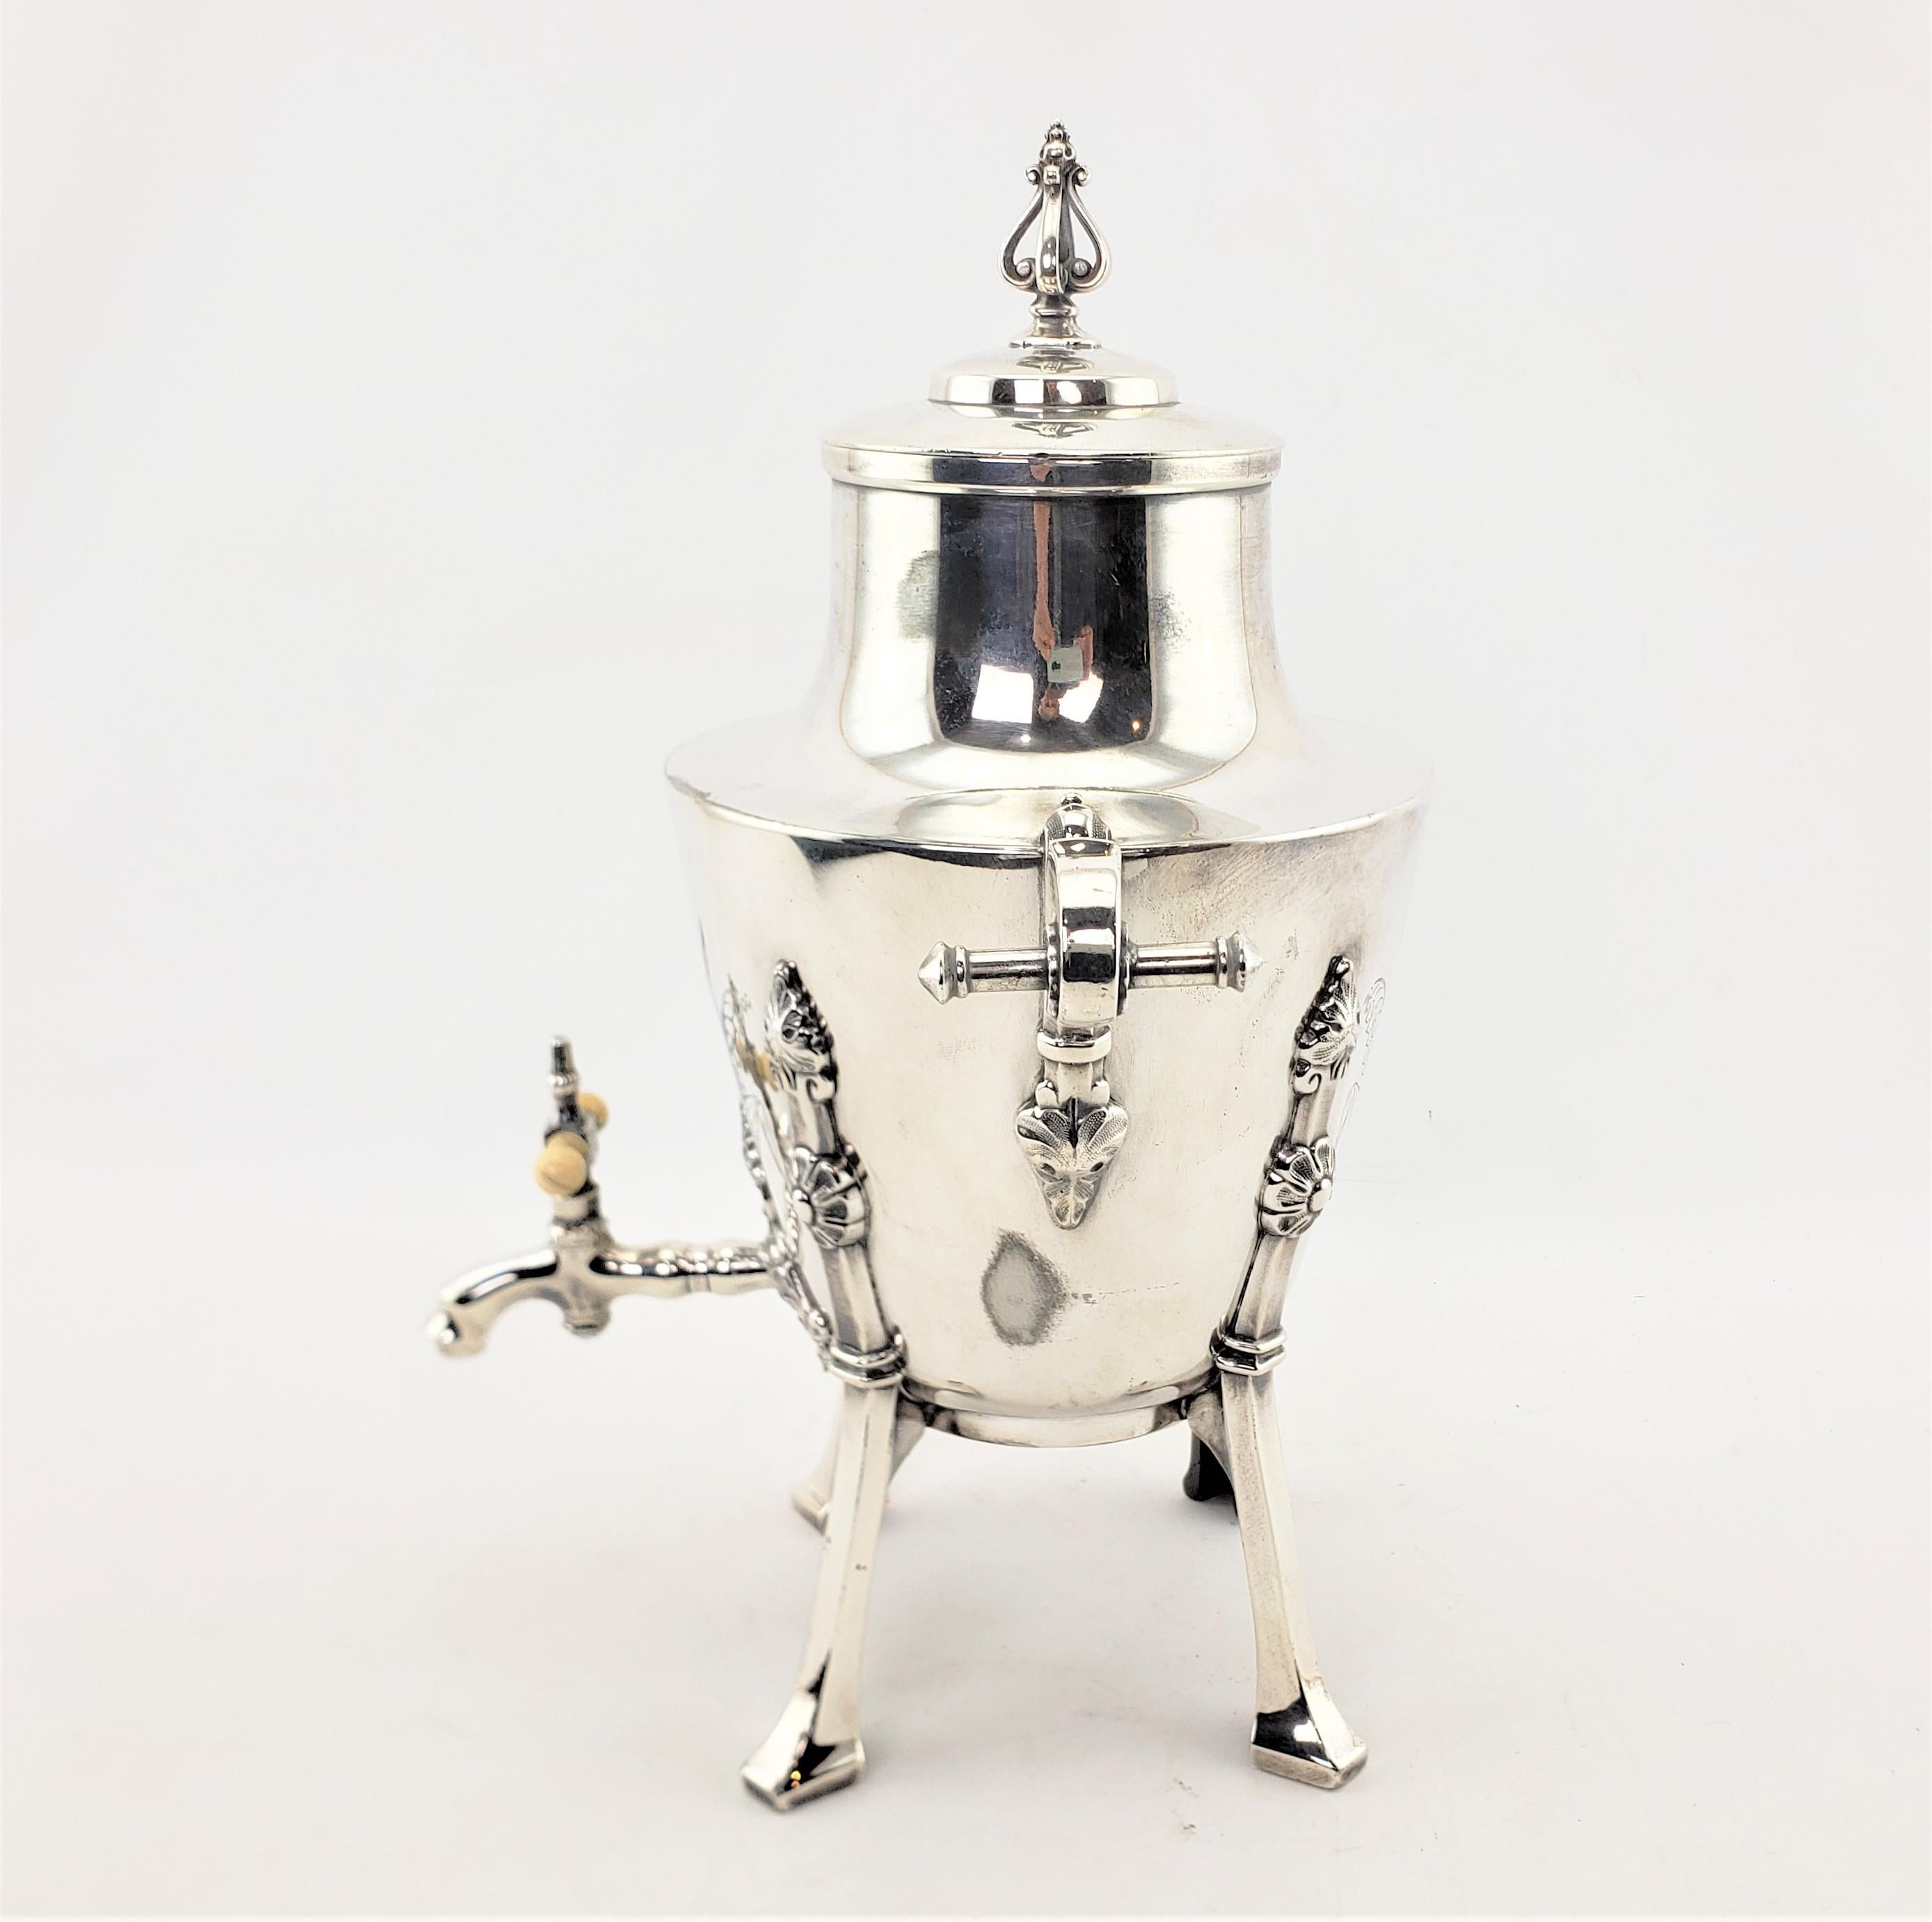 20th Century Antique Aesthetic Movement Silver Plated Hot Water Urn with Floral Decoration For Sale